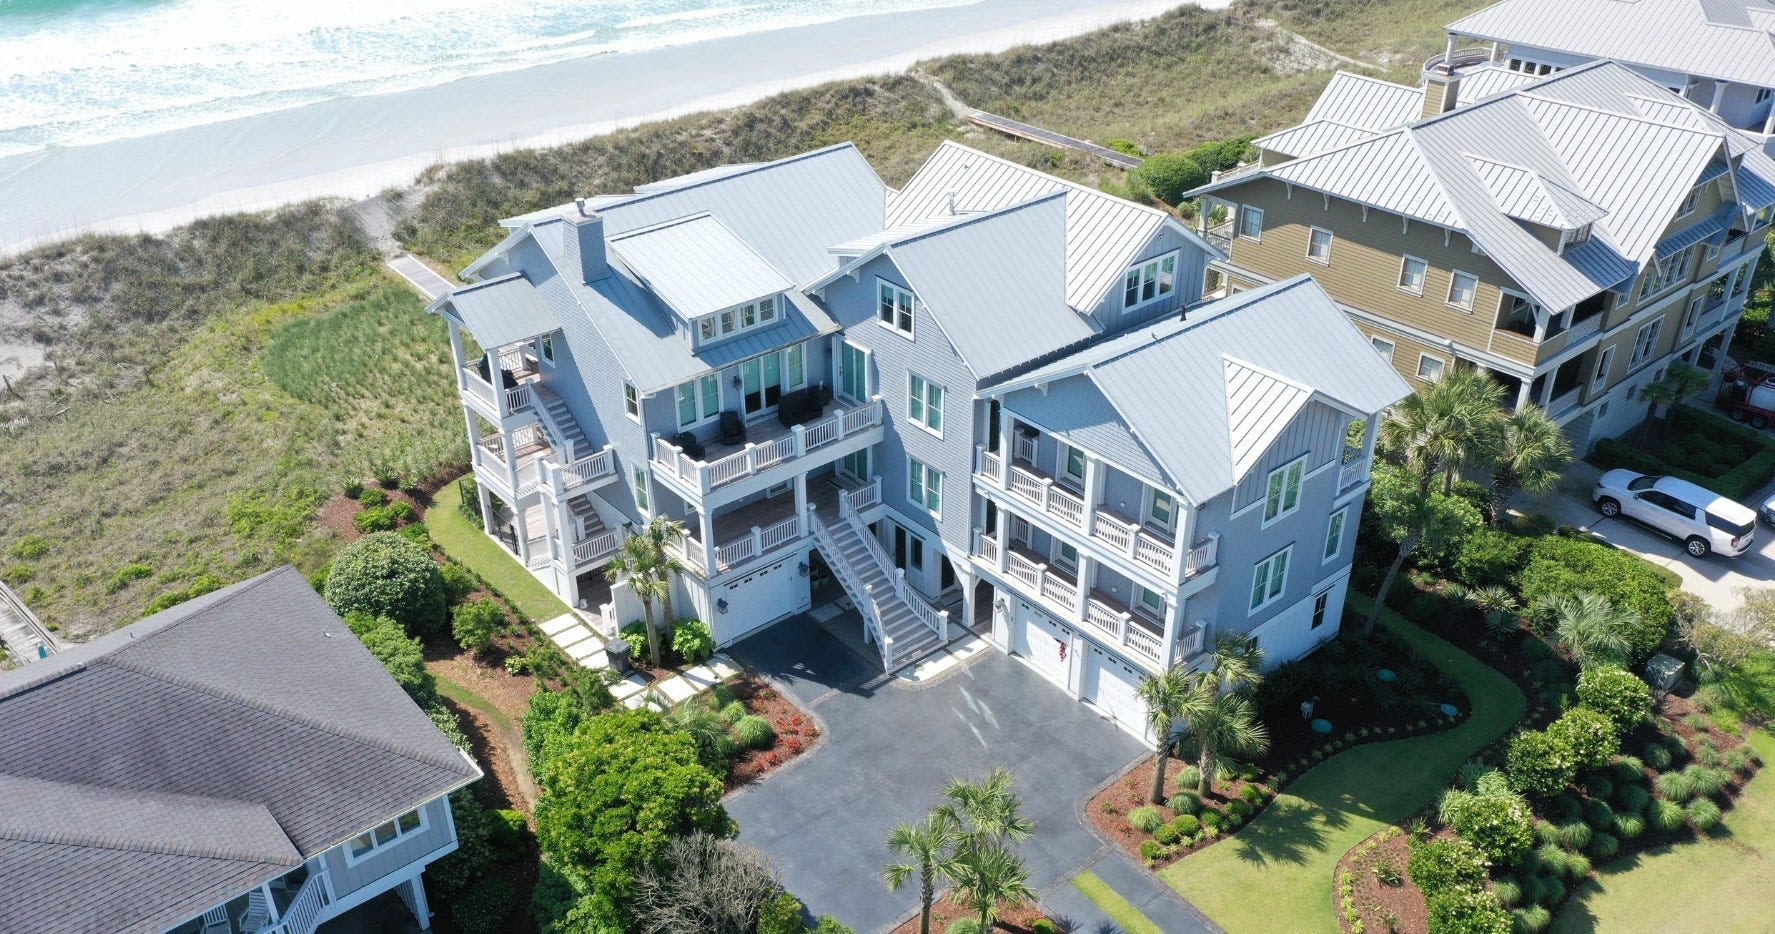 This home on Figure Eight Island is the most expensive one ever sold in North Carolina